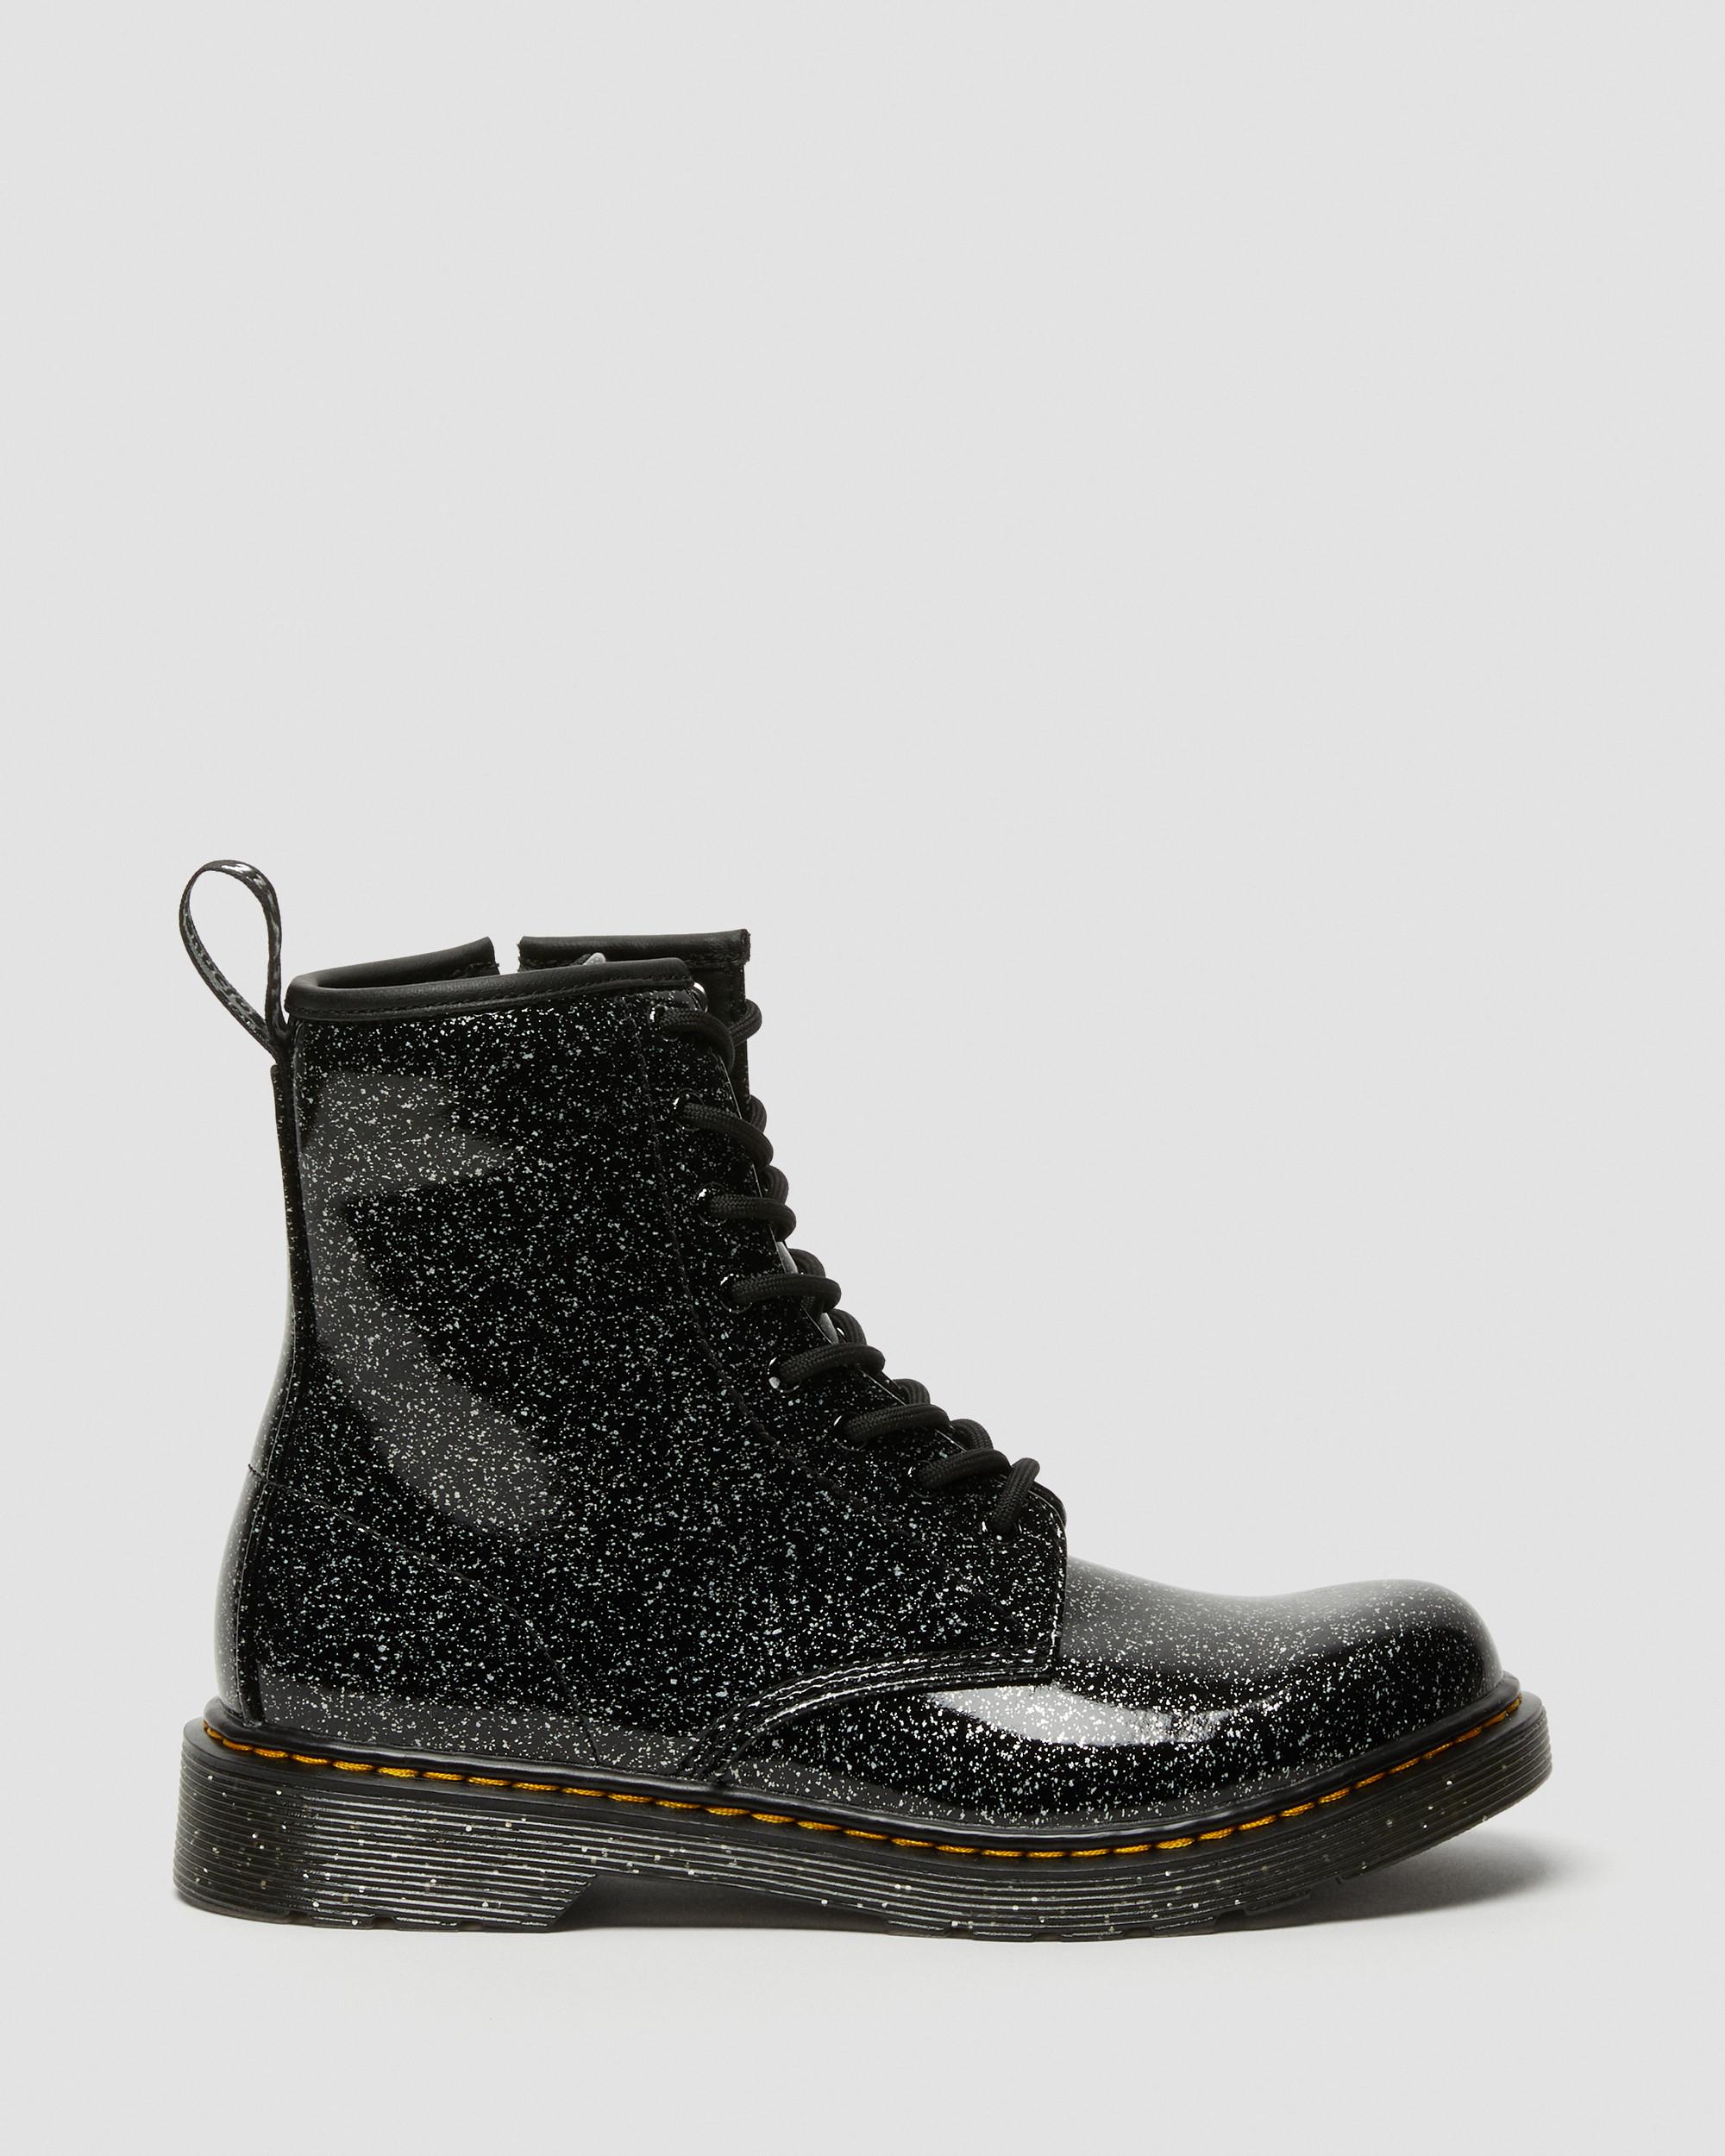 Lace Martens | 1460 in Youth Boots Black Dr. Glitter Up